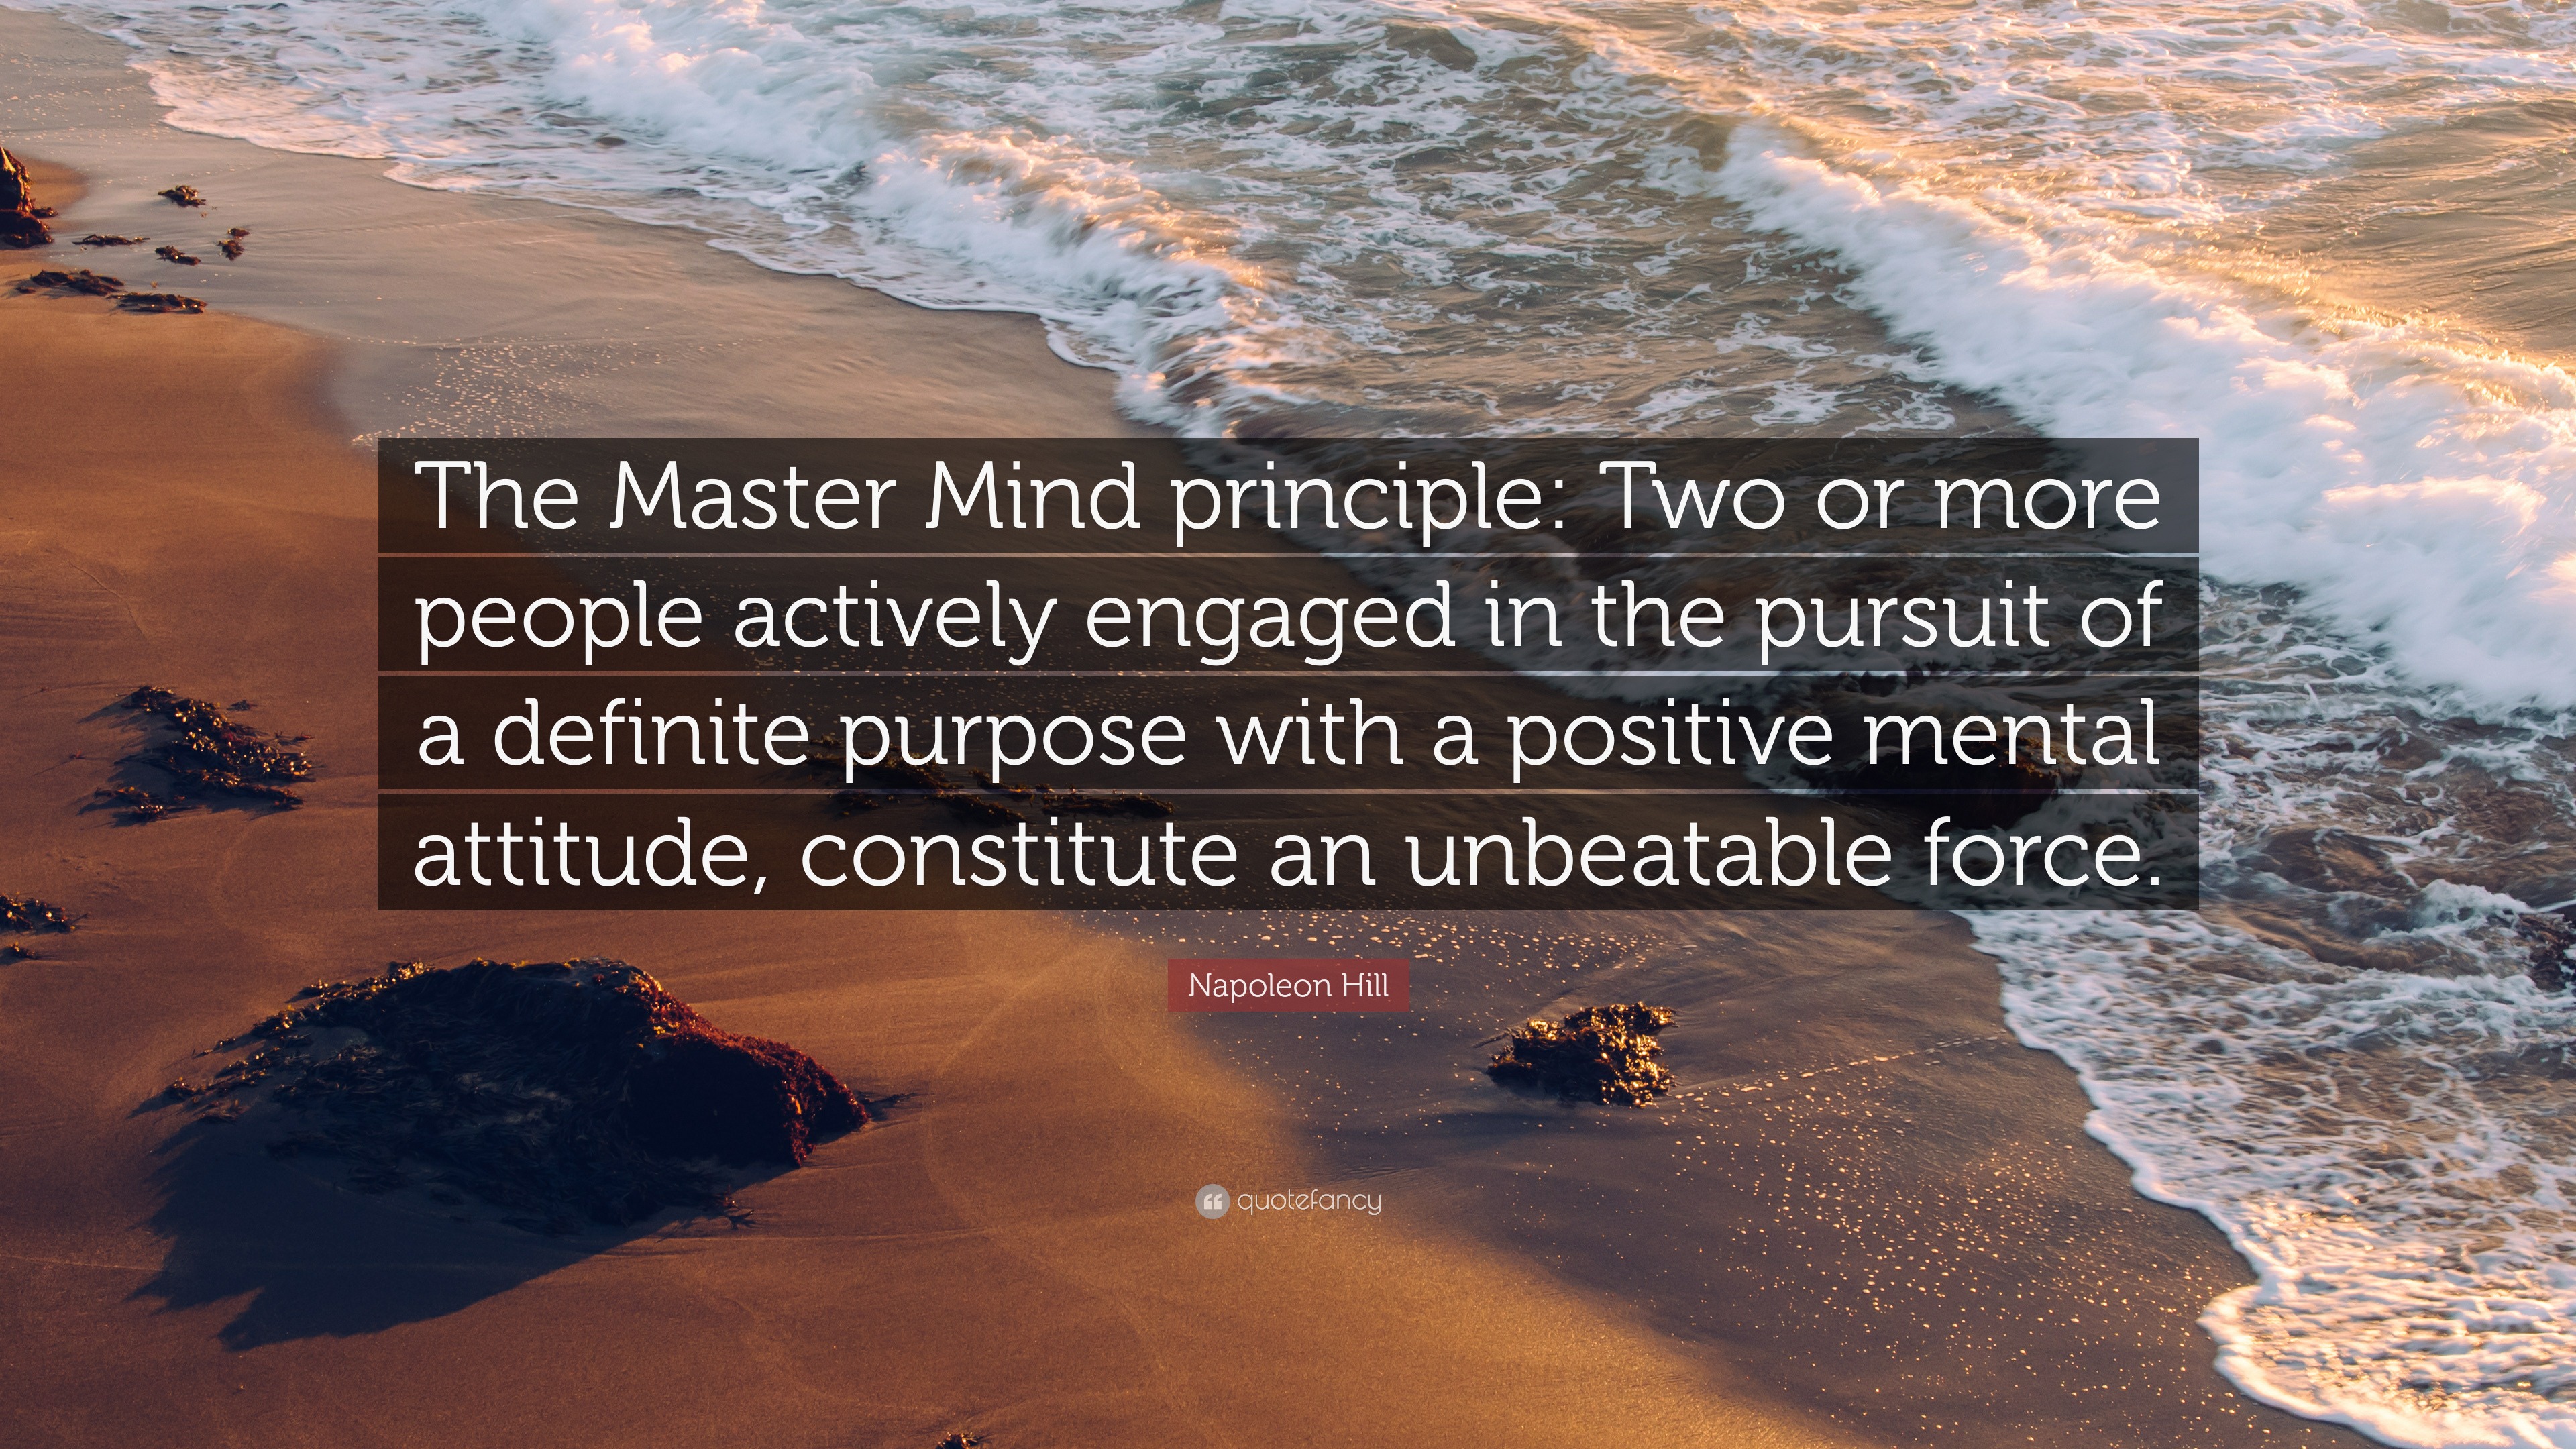 Napoleon Hill Quote: “The Master Mind principle: Two or more people  actively engaged in the pursuit of a definite purpose with a positive  ment”